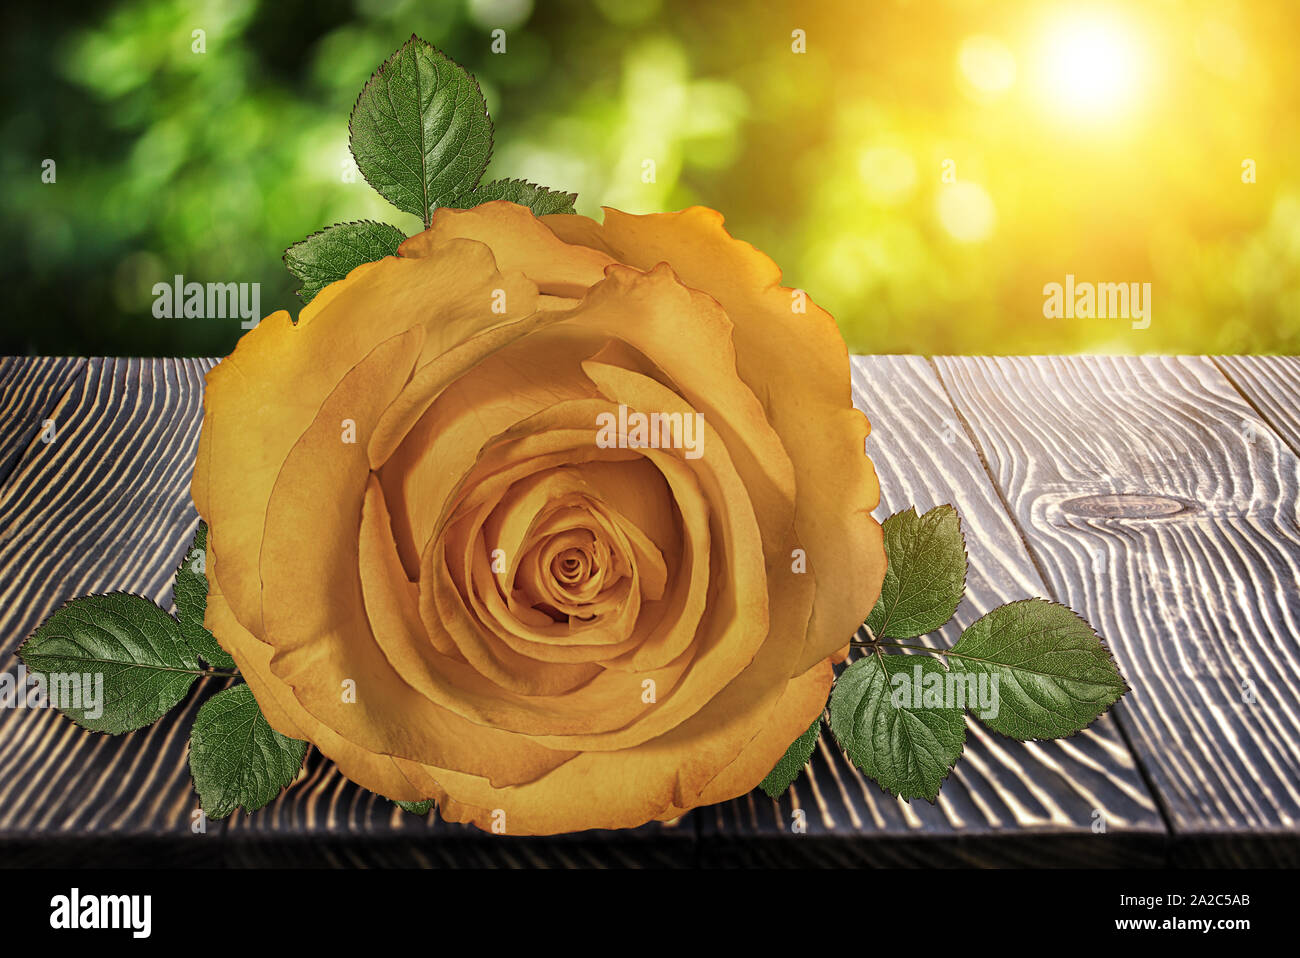 Rose on wooden deck table over beautiful bokeh background Stock Photo